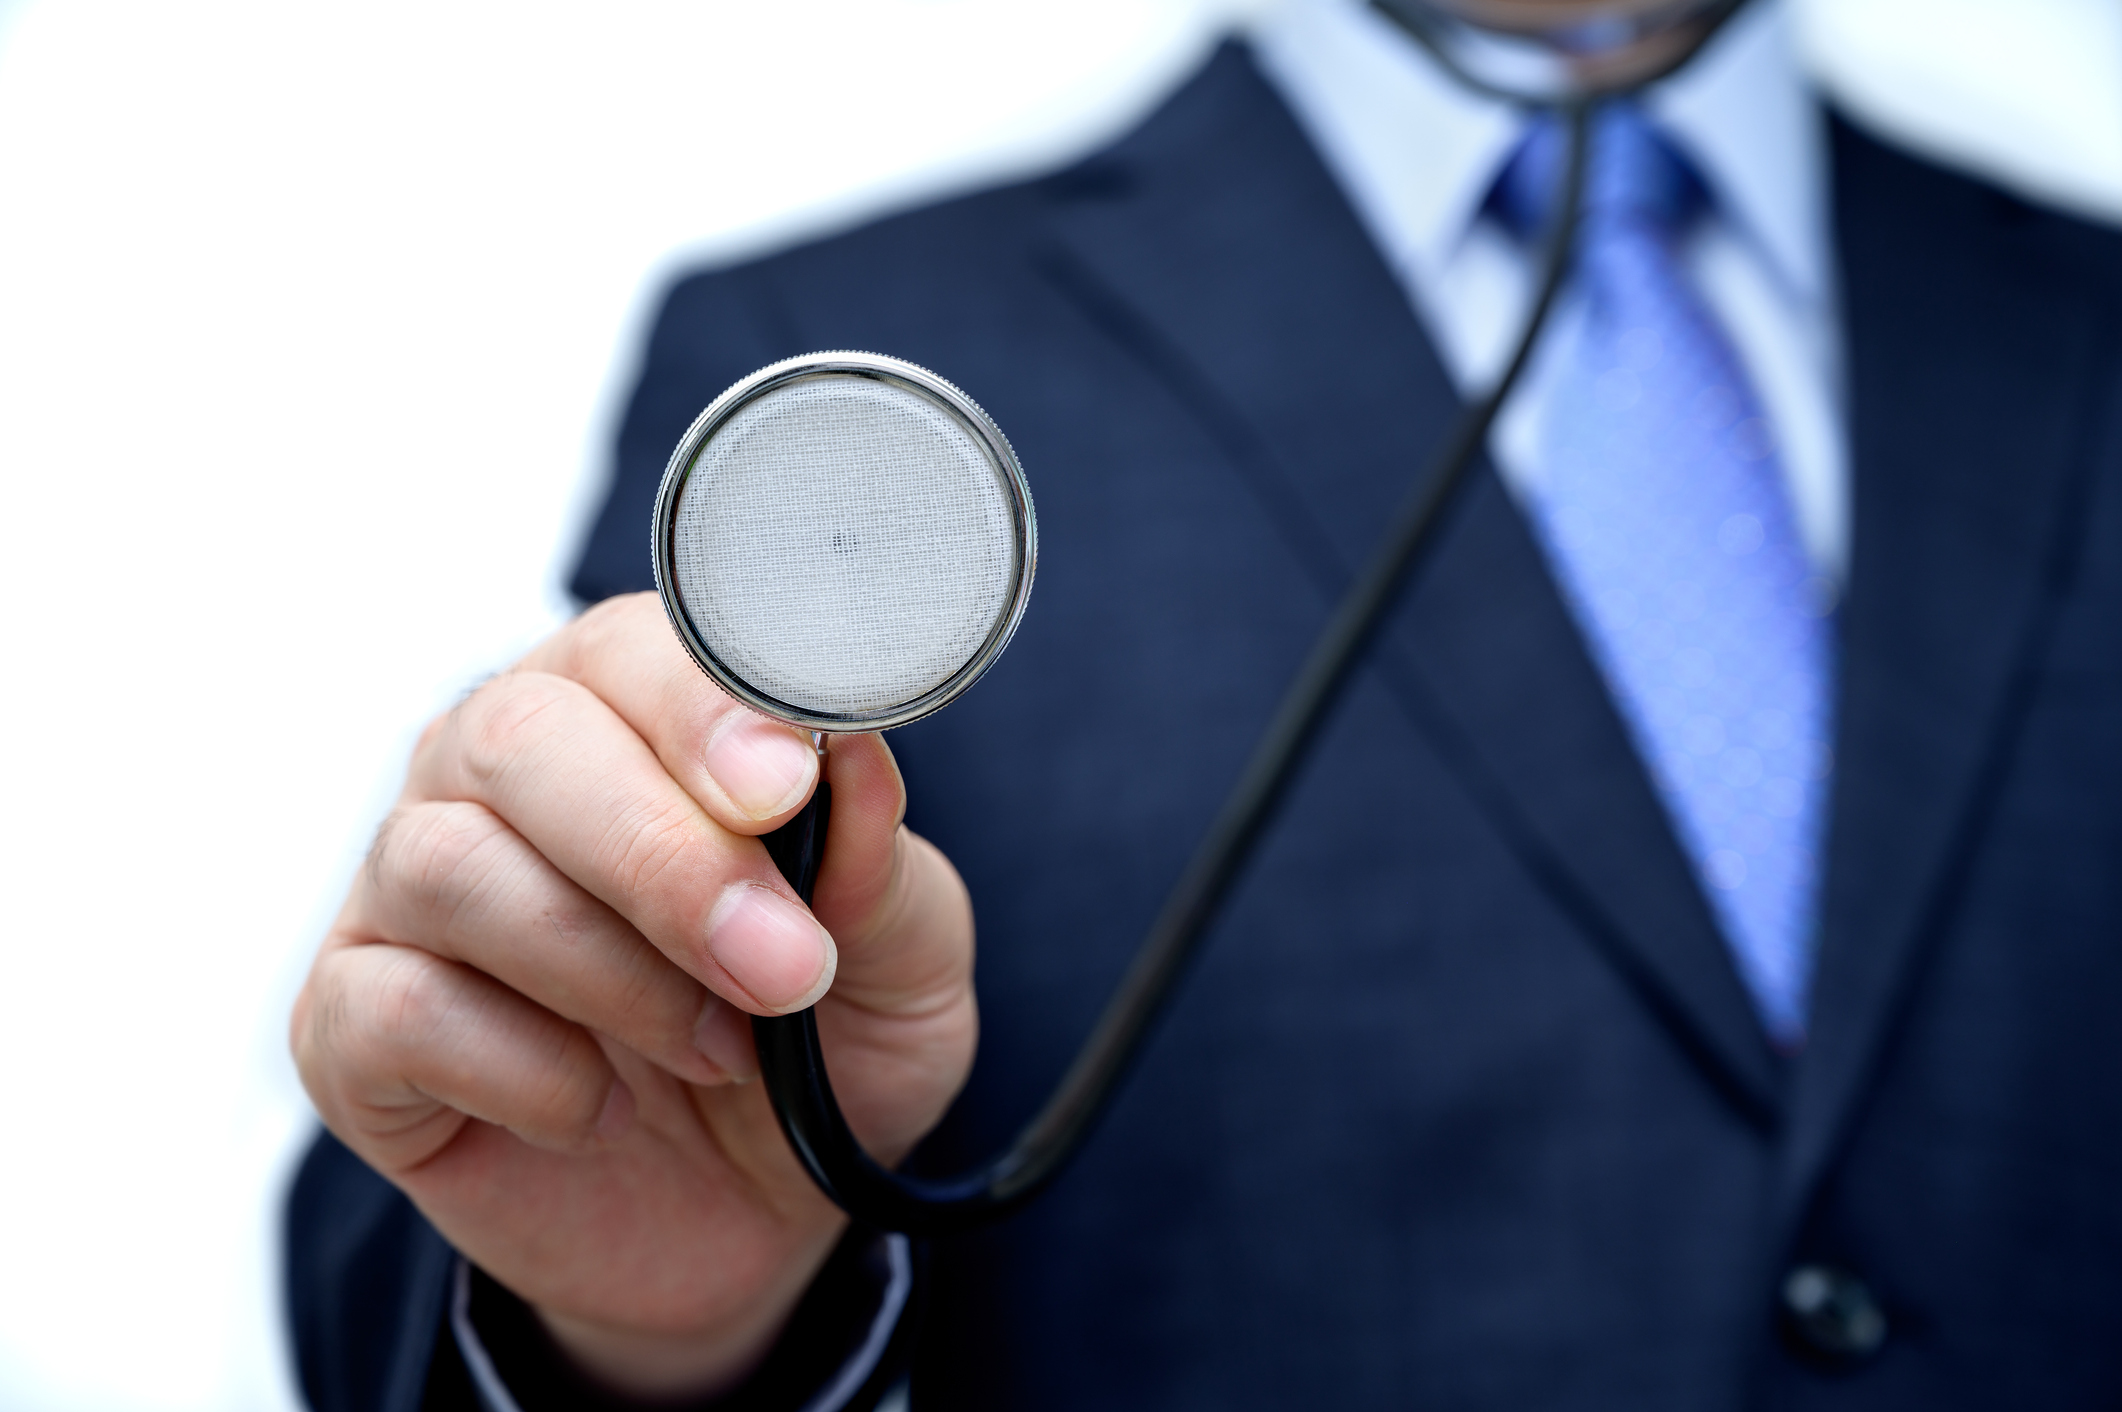 A man in a suit holds a stethoscope